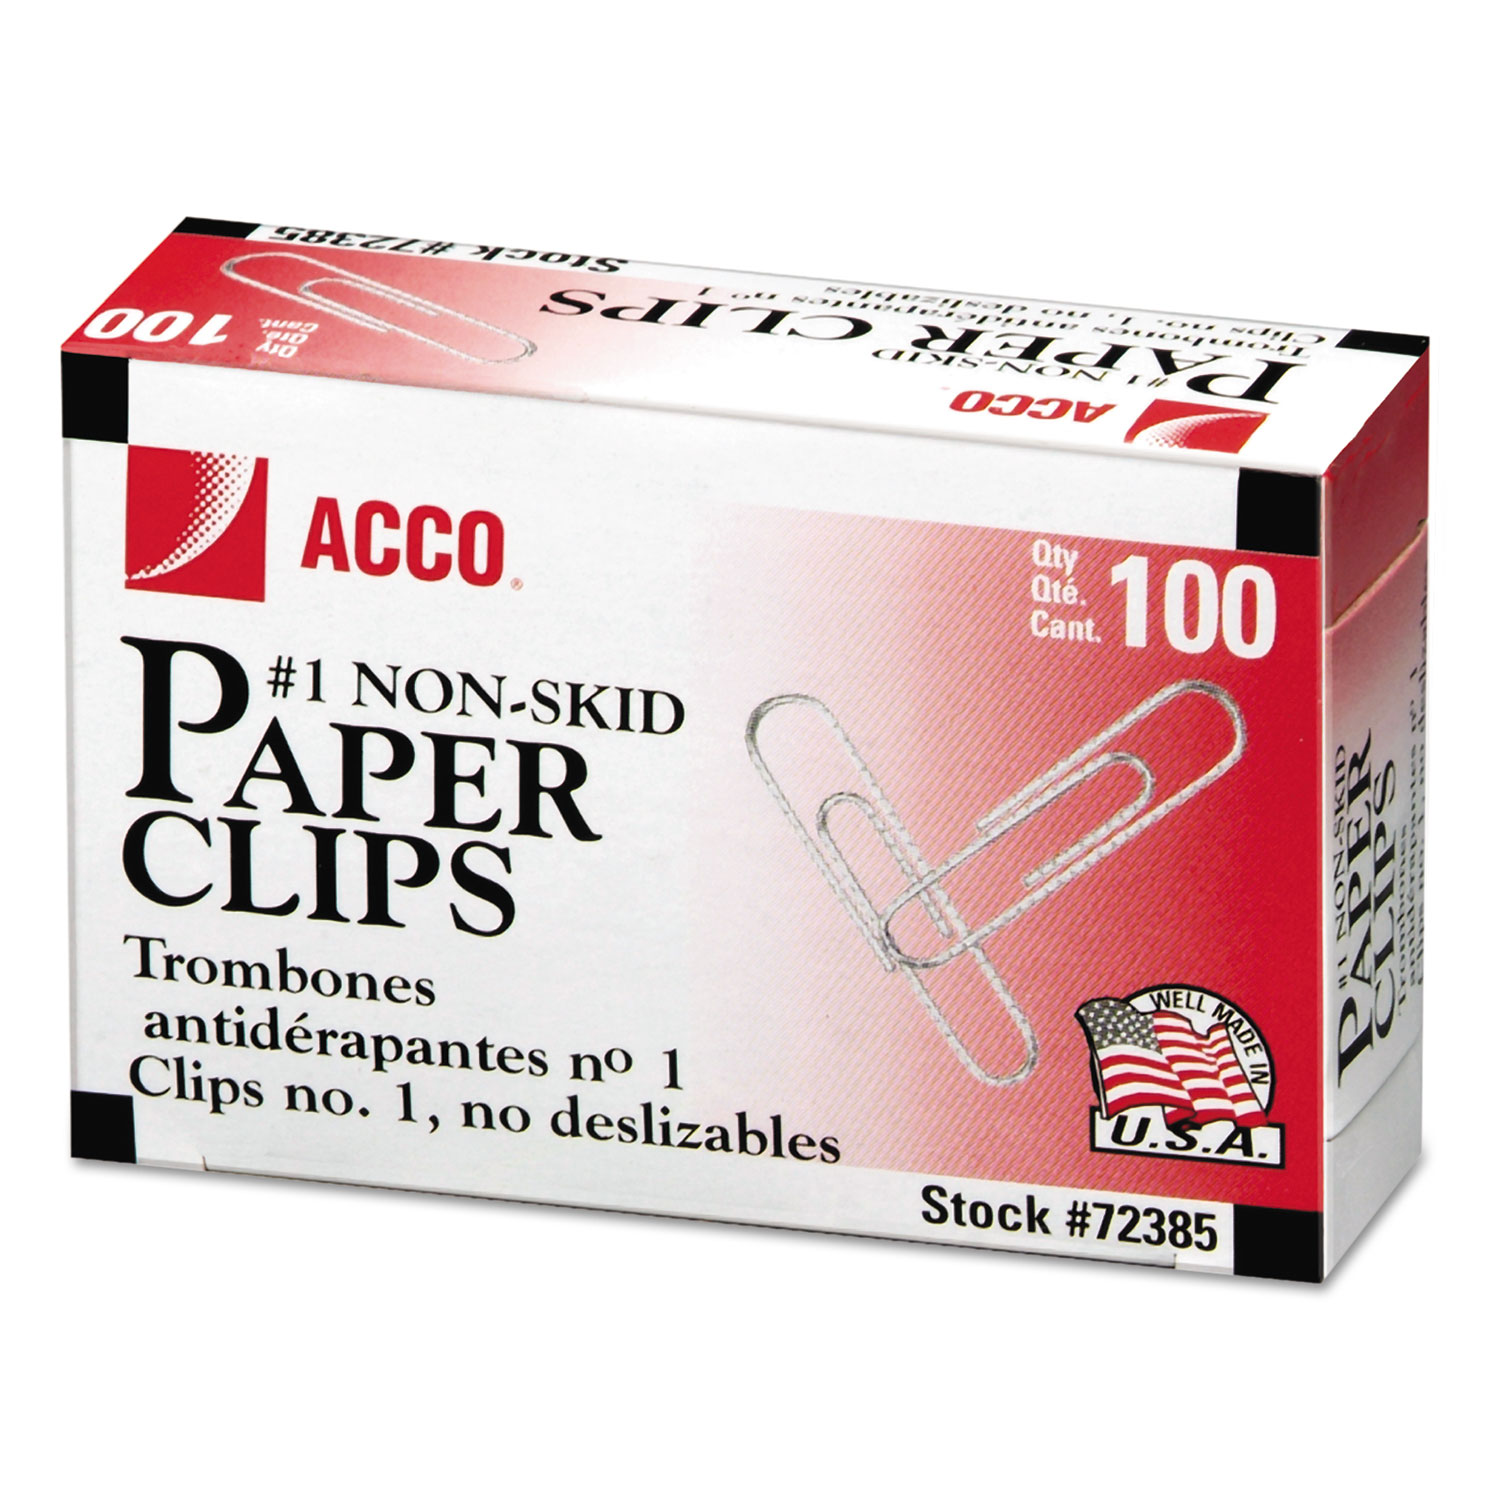 Nonskid Paper Clips Wire Jumbo Silver  boxes of 100 clips for$ 2.99 each box 